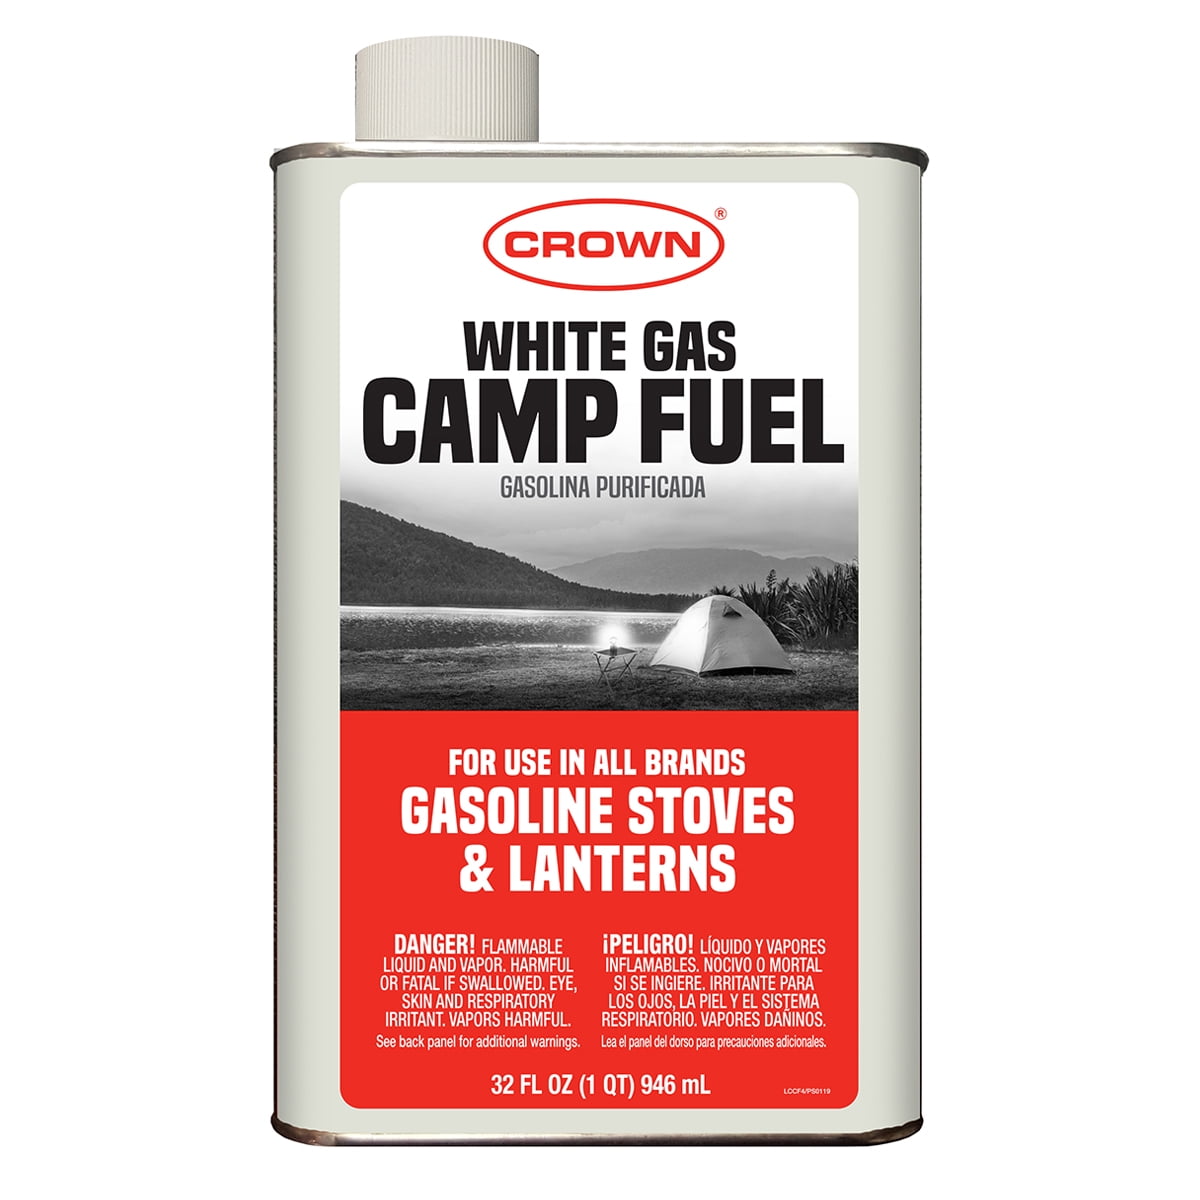 Crown White Gas Camp Fuel for Use in Gasoline Stoves and Lanterns, 1 Quart